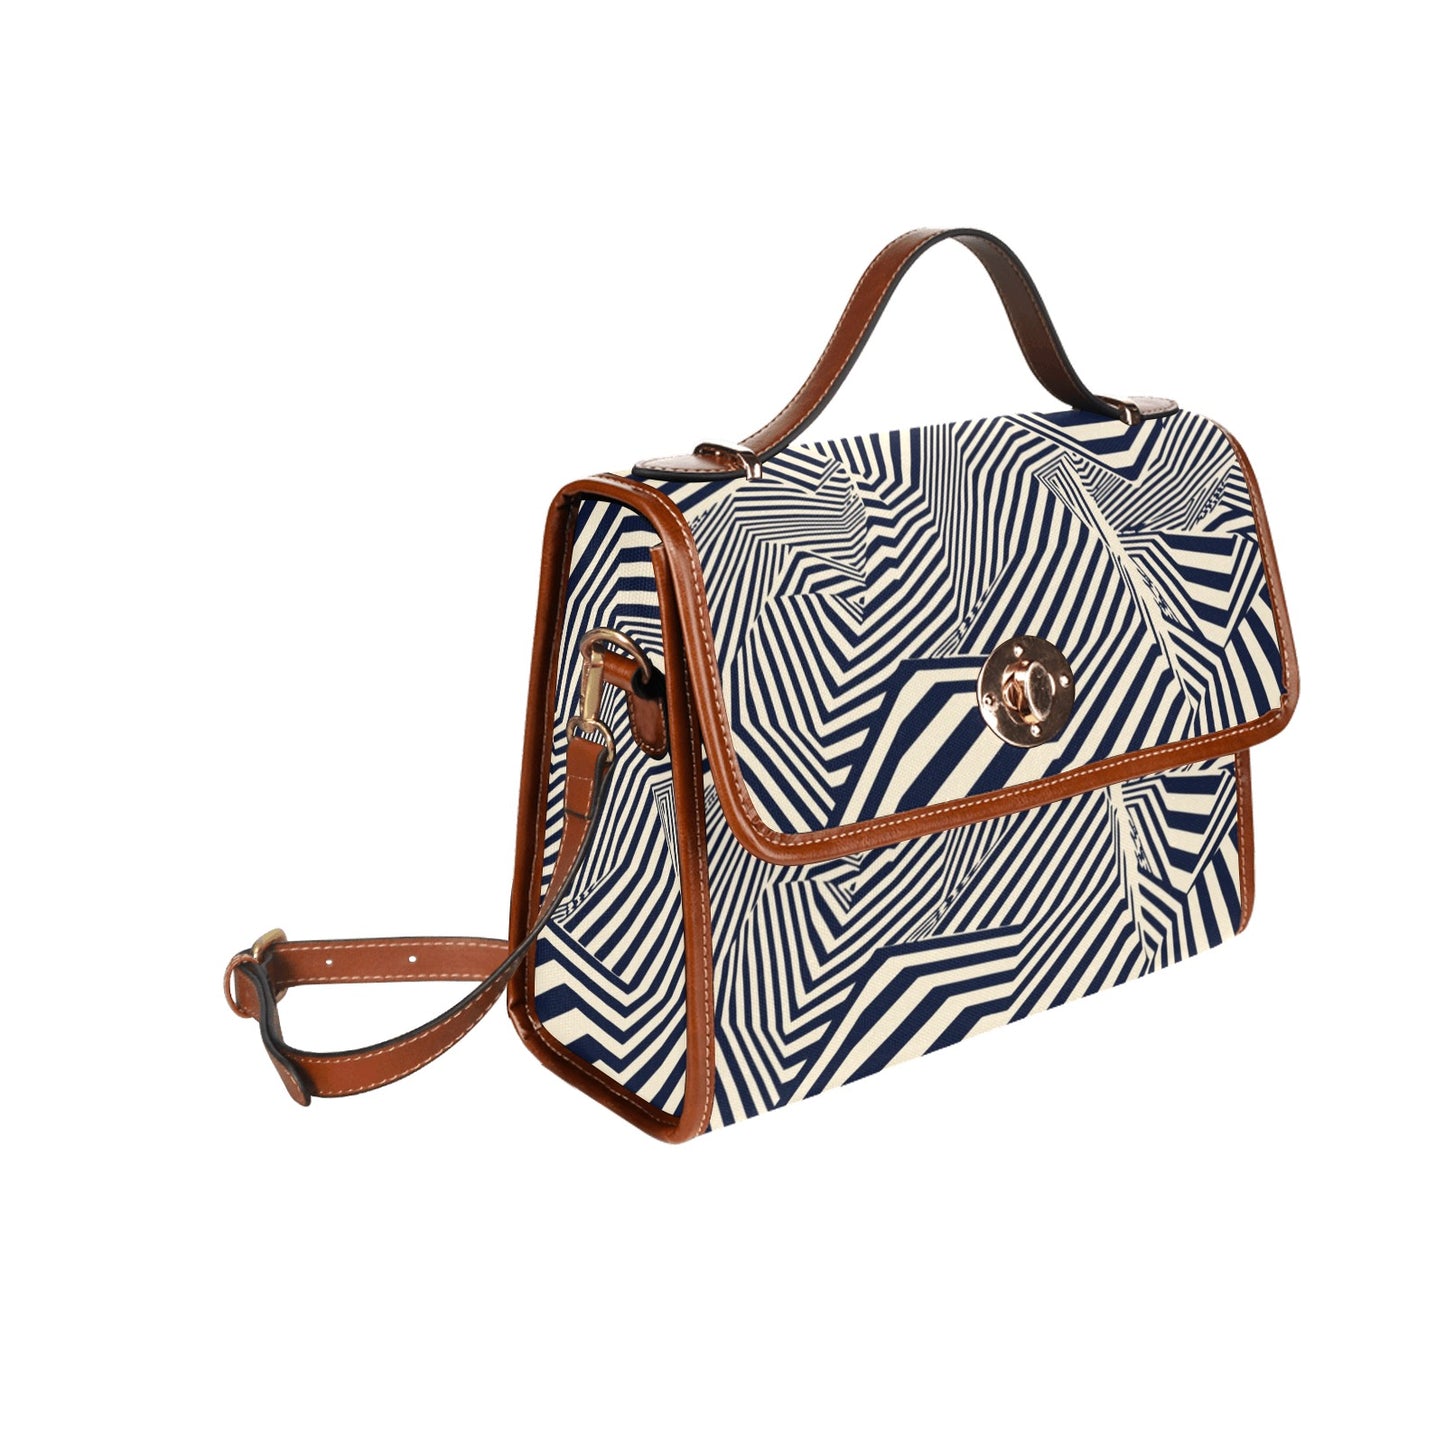 A-mazing All Over Print Waterproof Canvas Bag (Brown Strap)